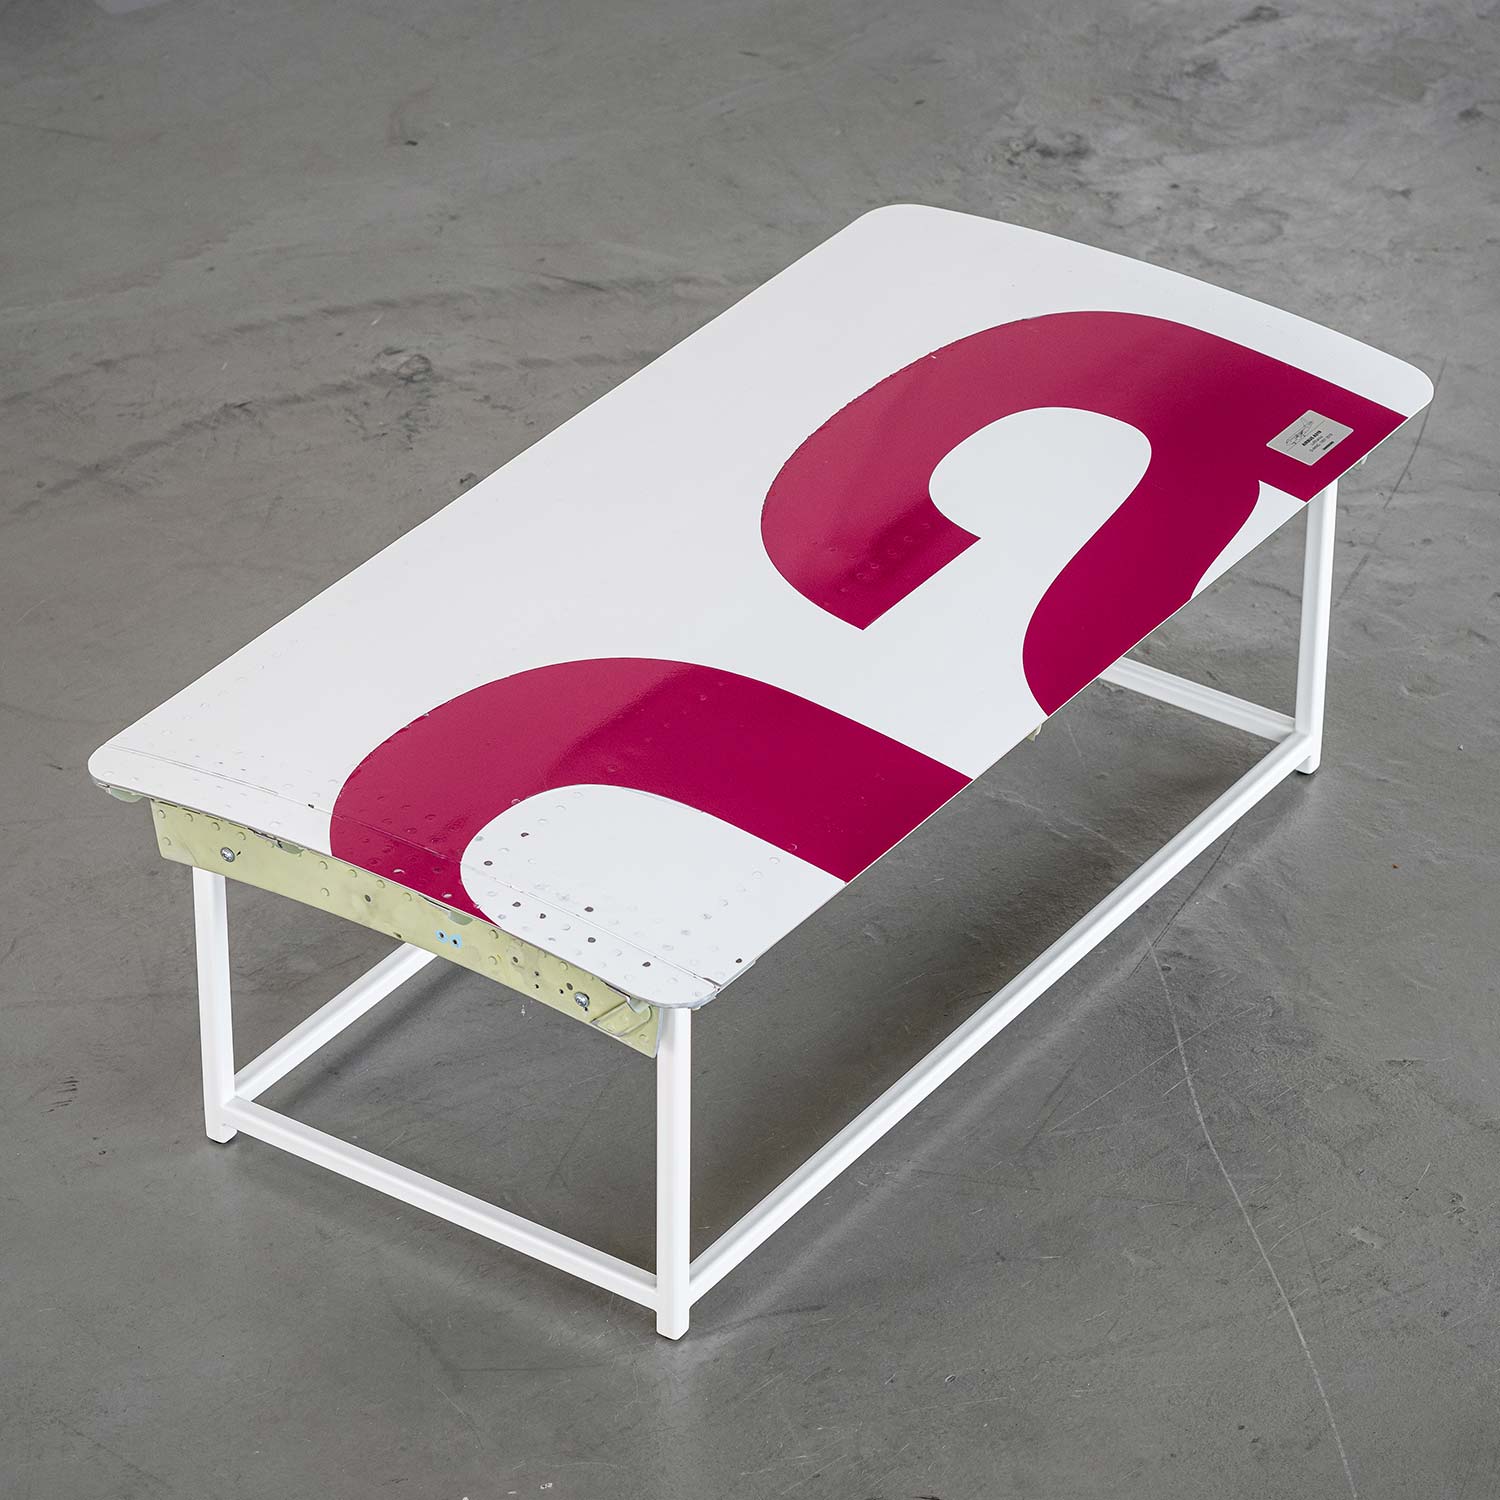 Germanwings Special Edition Couchtisch Nr. 3/4 A319, Originallack, Gestell: Weiss RAL 9010, ca. 120 x 59 cm